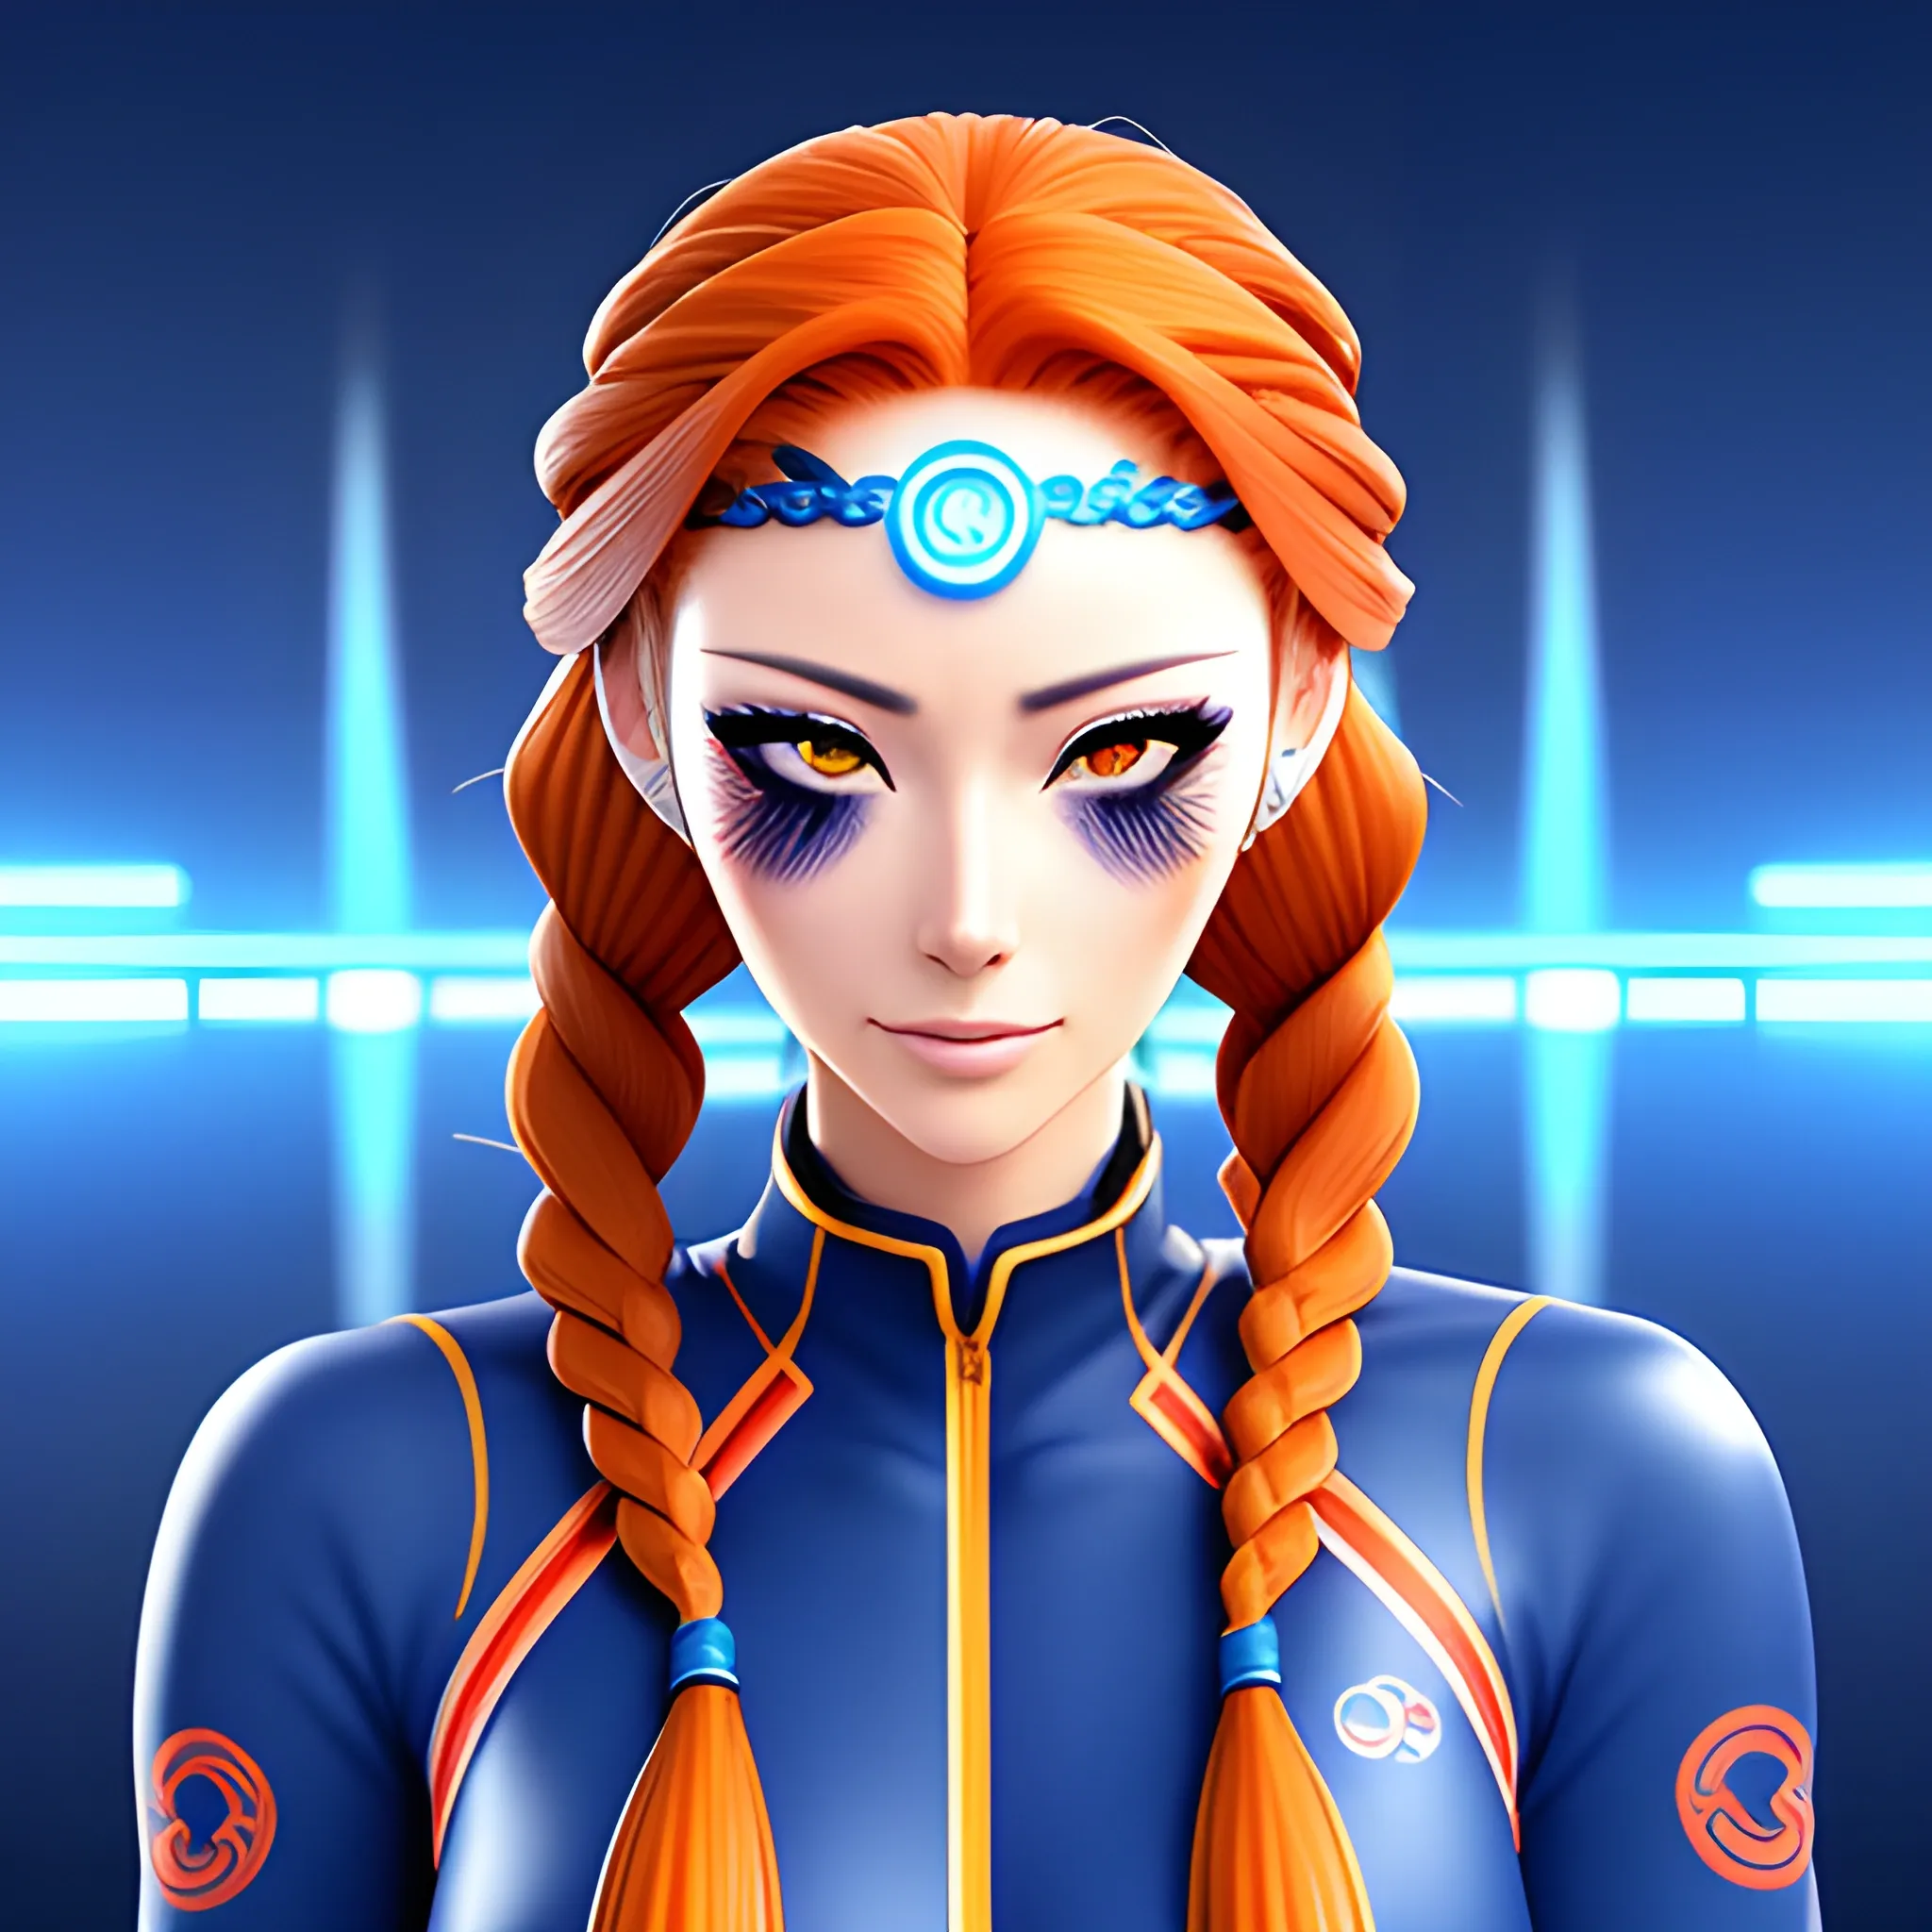 An anime-style girl with long fiery hair braided in a braid with a Japanese character on her face, wearing blue high-tech clothes, middle ground, anime, classic drawing, 3D